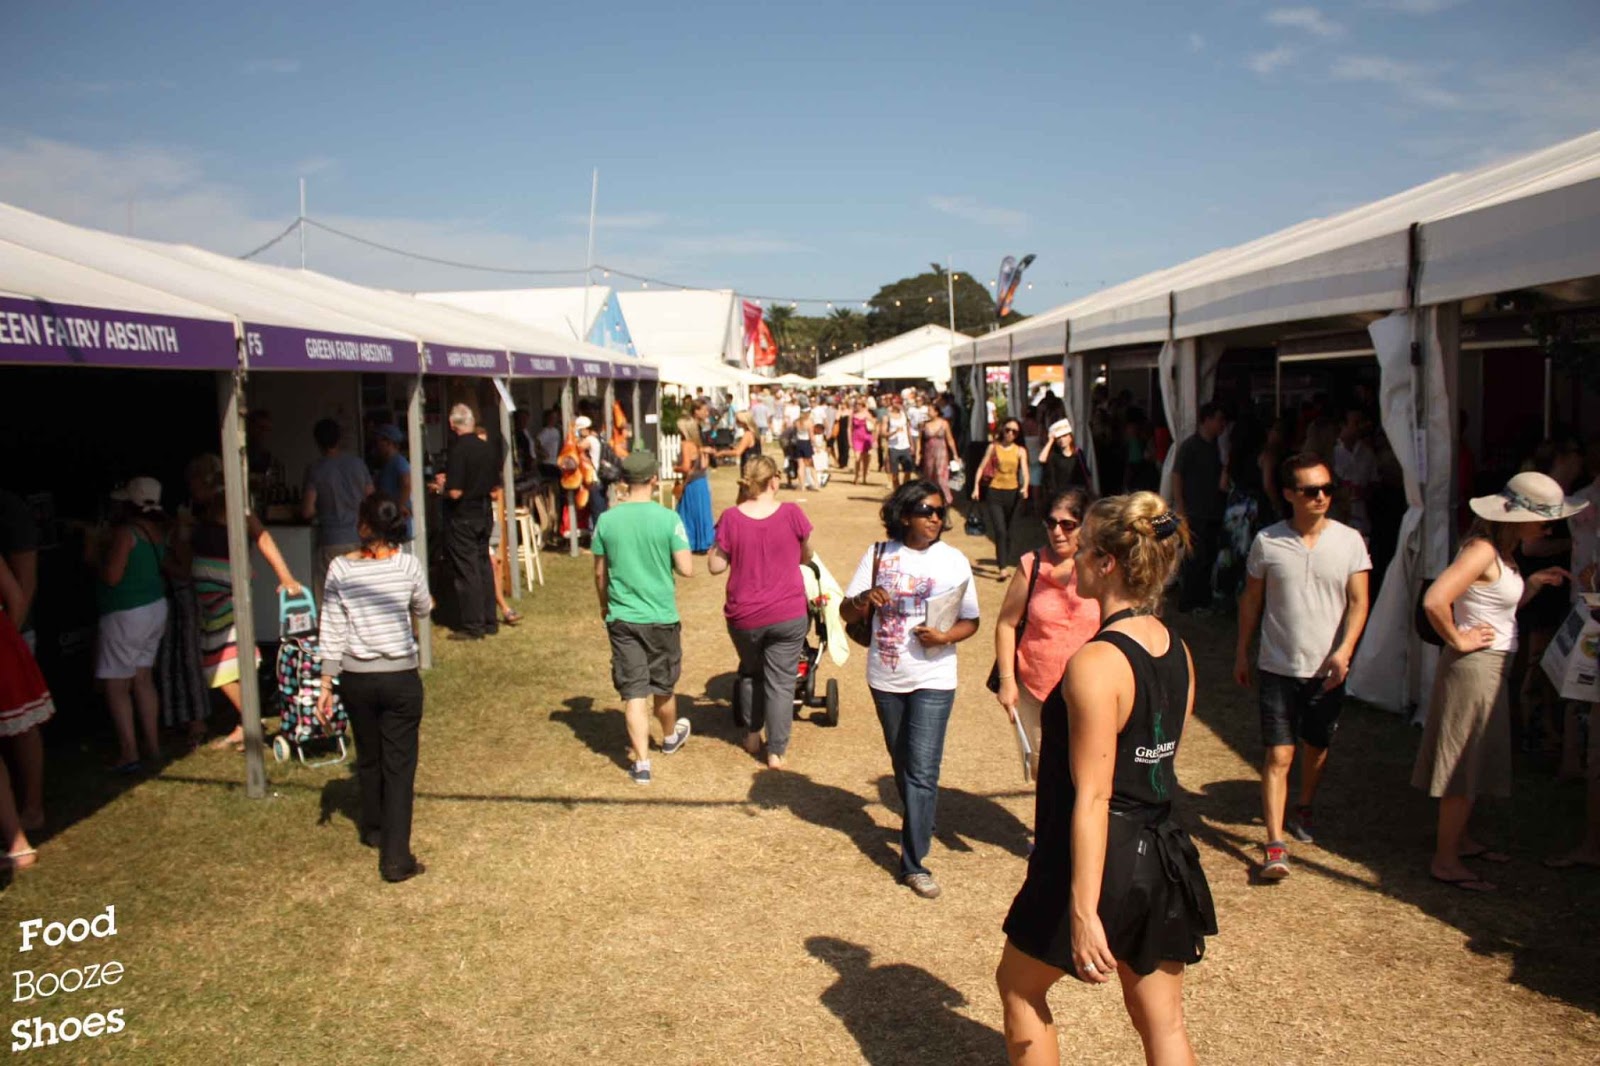 Food, booze and shoes: Three's a charm at Taste of Sydney